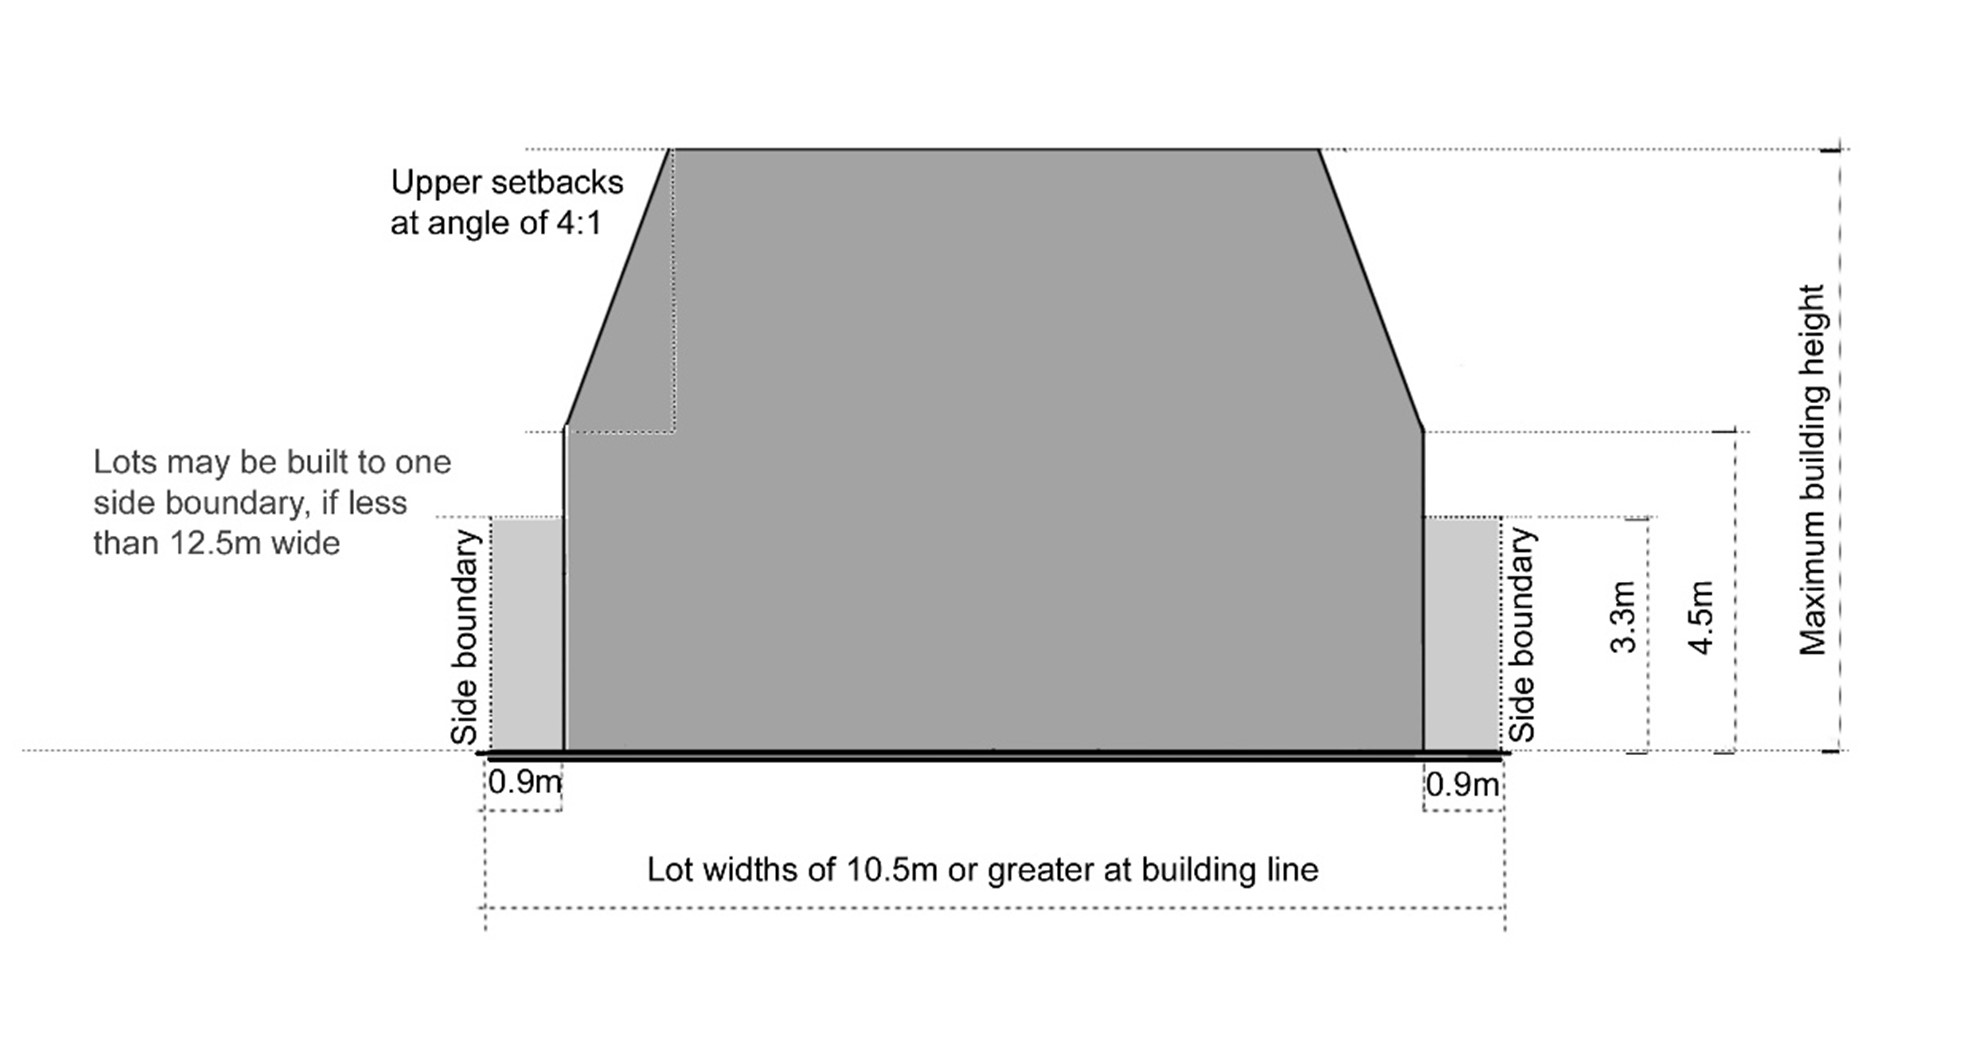 Figure D2.07: The following building envelope applies to lots with a width measured at the building line of 10.5m or greater